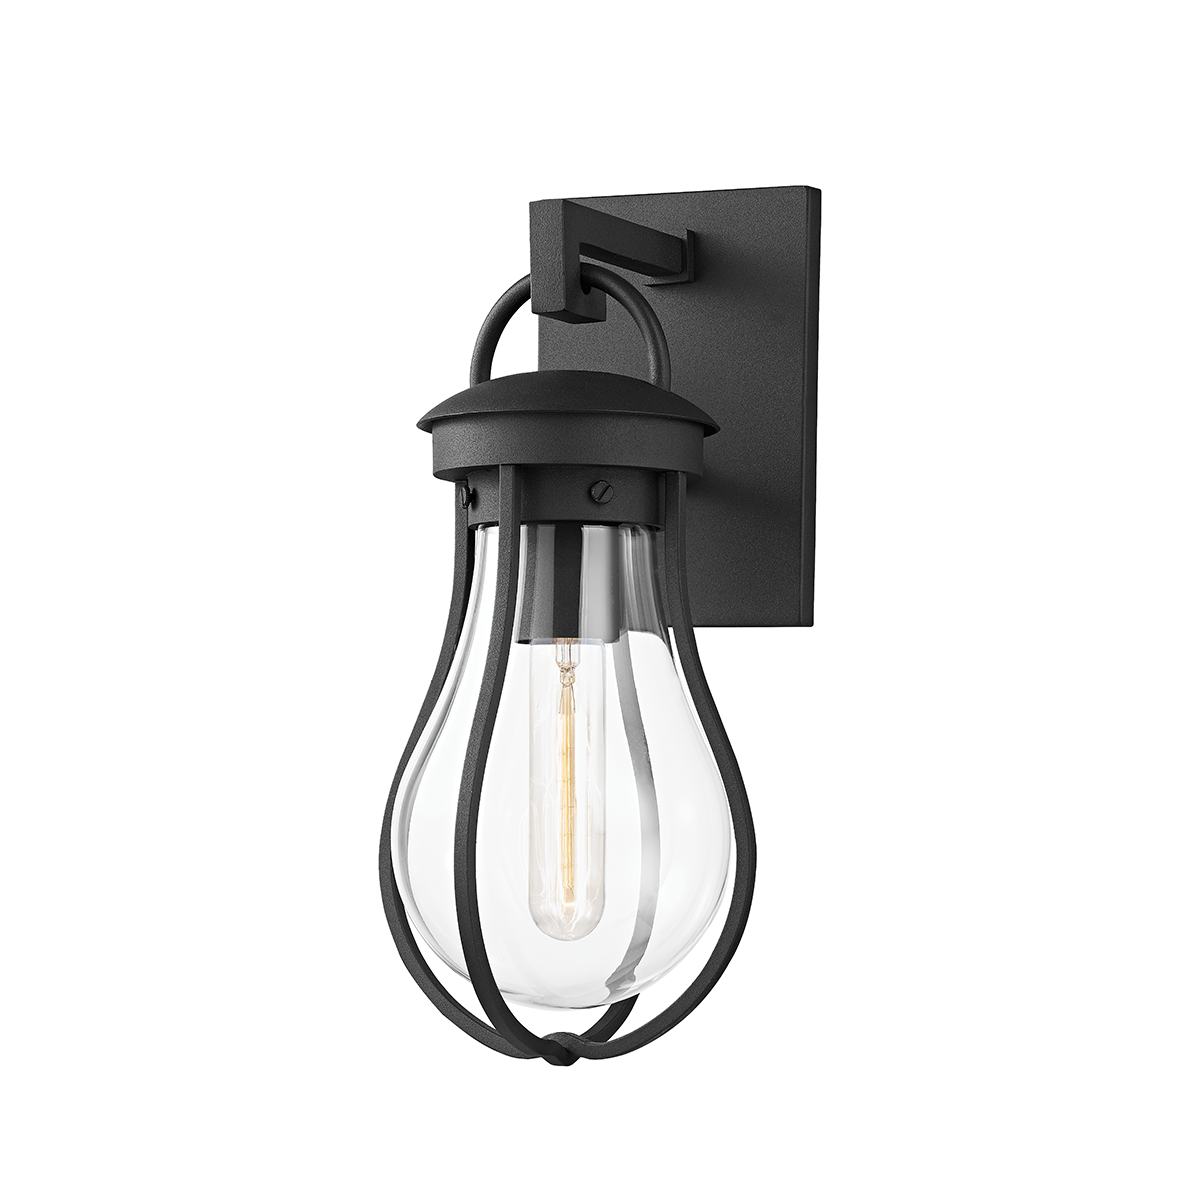 Troy Lighting 1 LIGHT SMALL EXTERIOR WALL SCONCE B9314 Outdoor l Wall Troy Lighting TEXTURE BLACK  